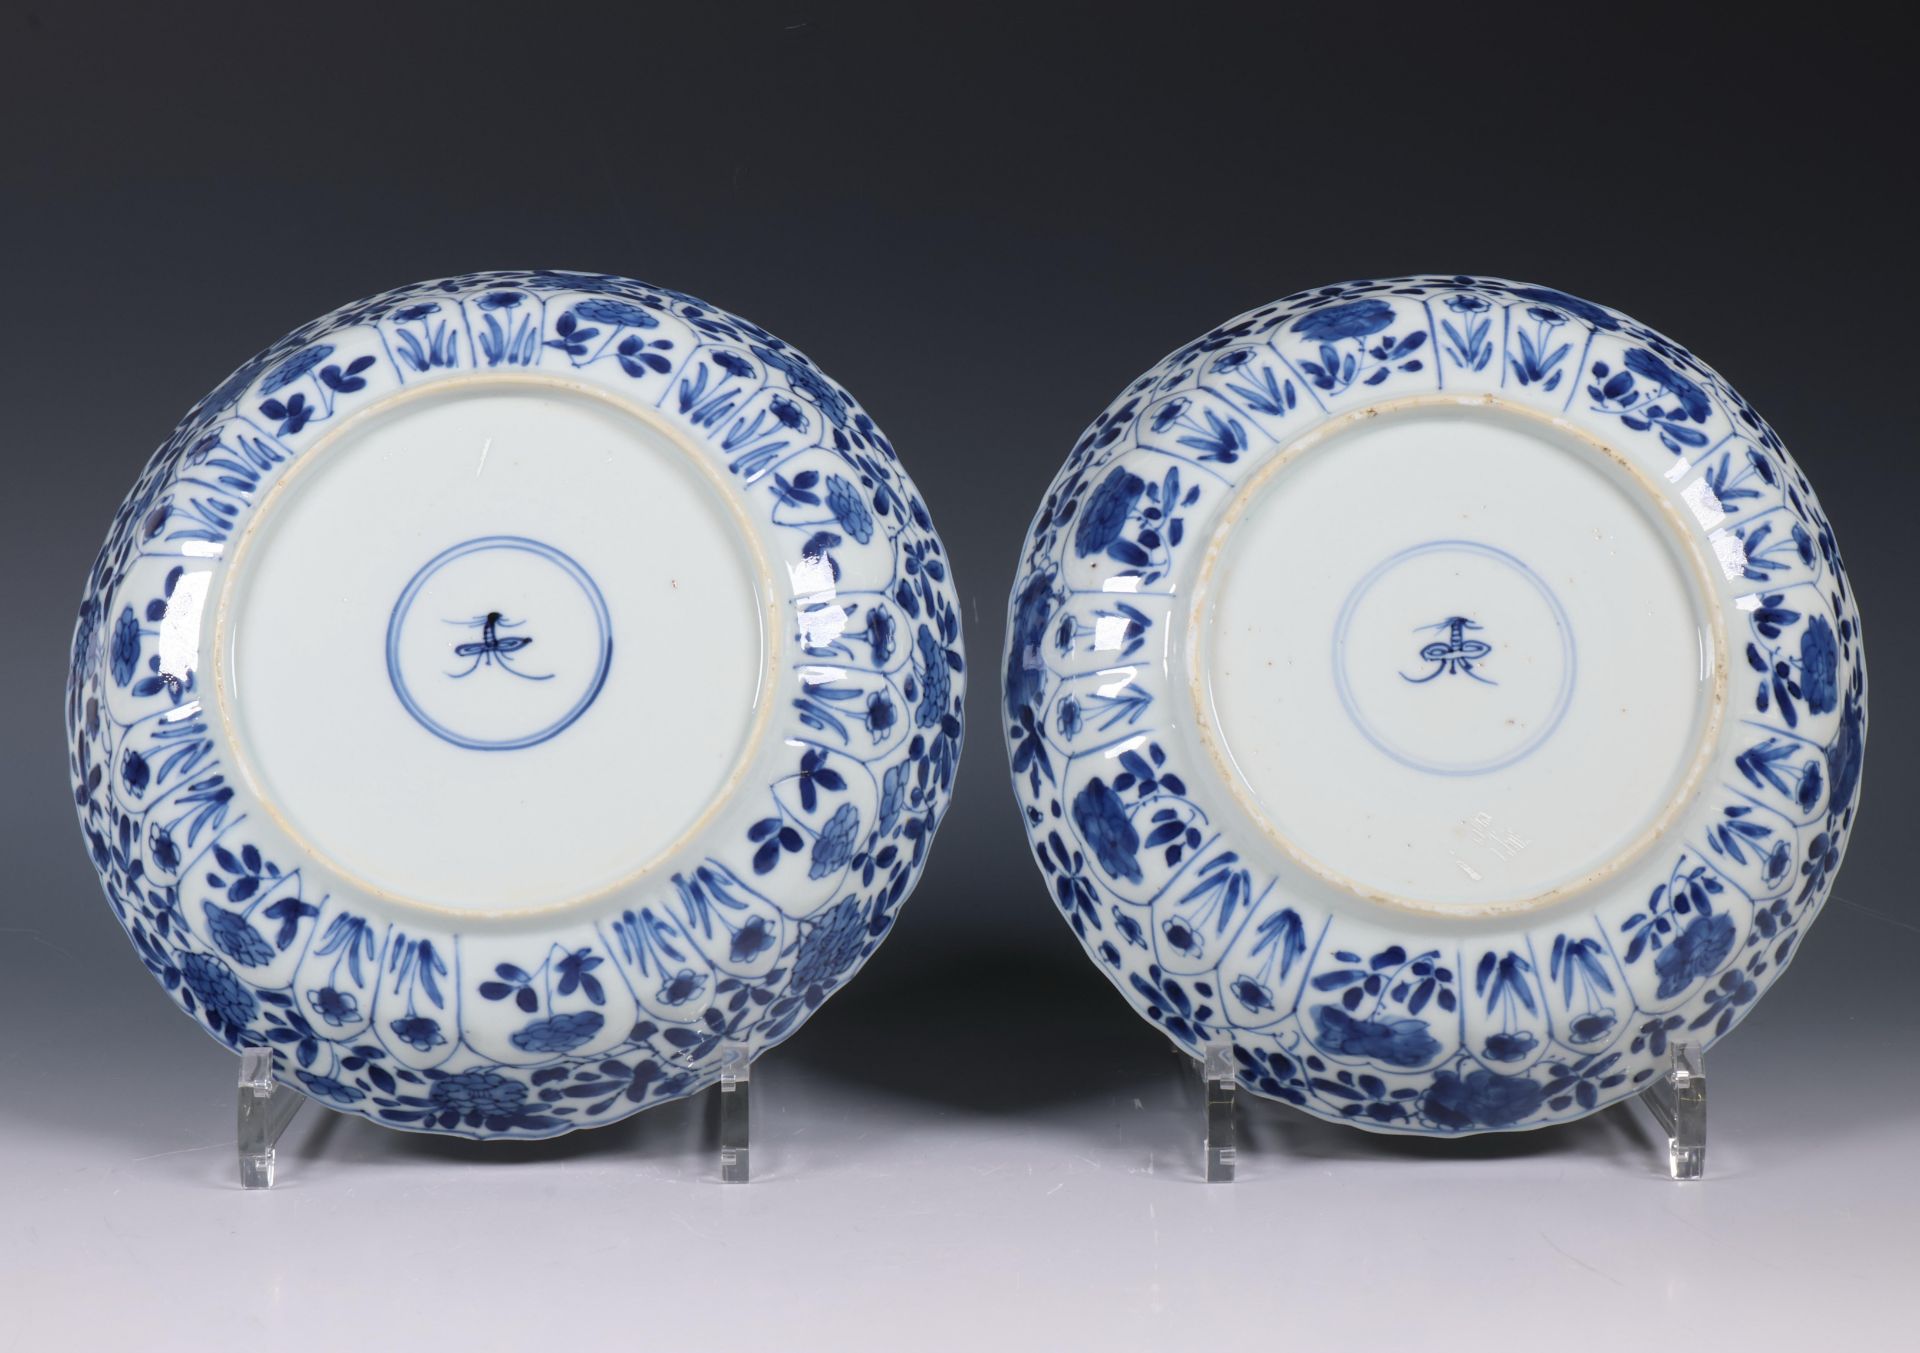 China, two pairs of blue and white plates, Kangxi period (1662-1722) and 18th century, - Image 4 of 4